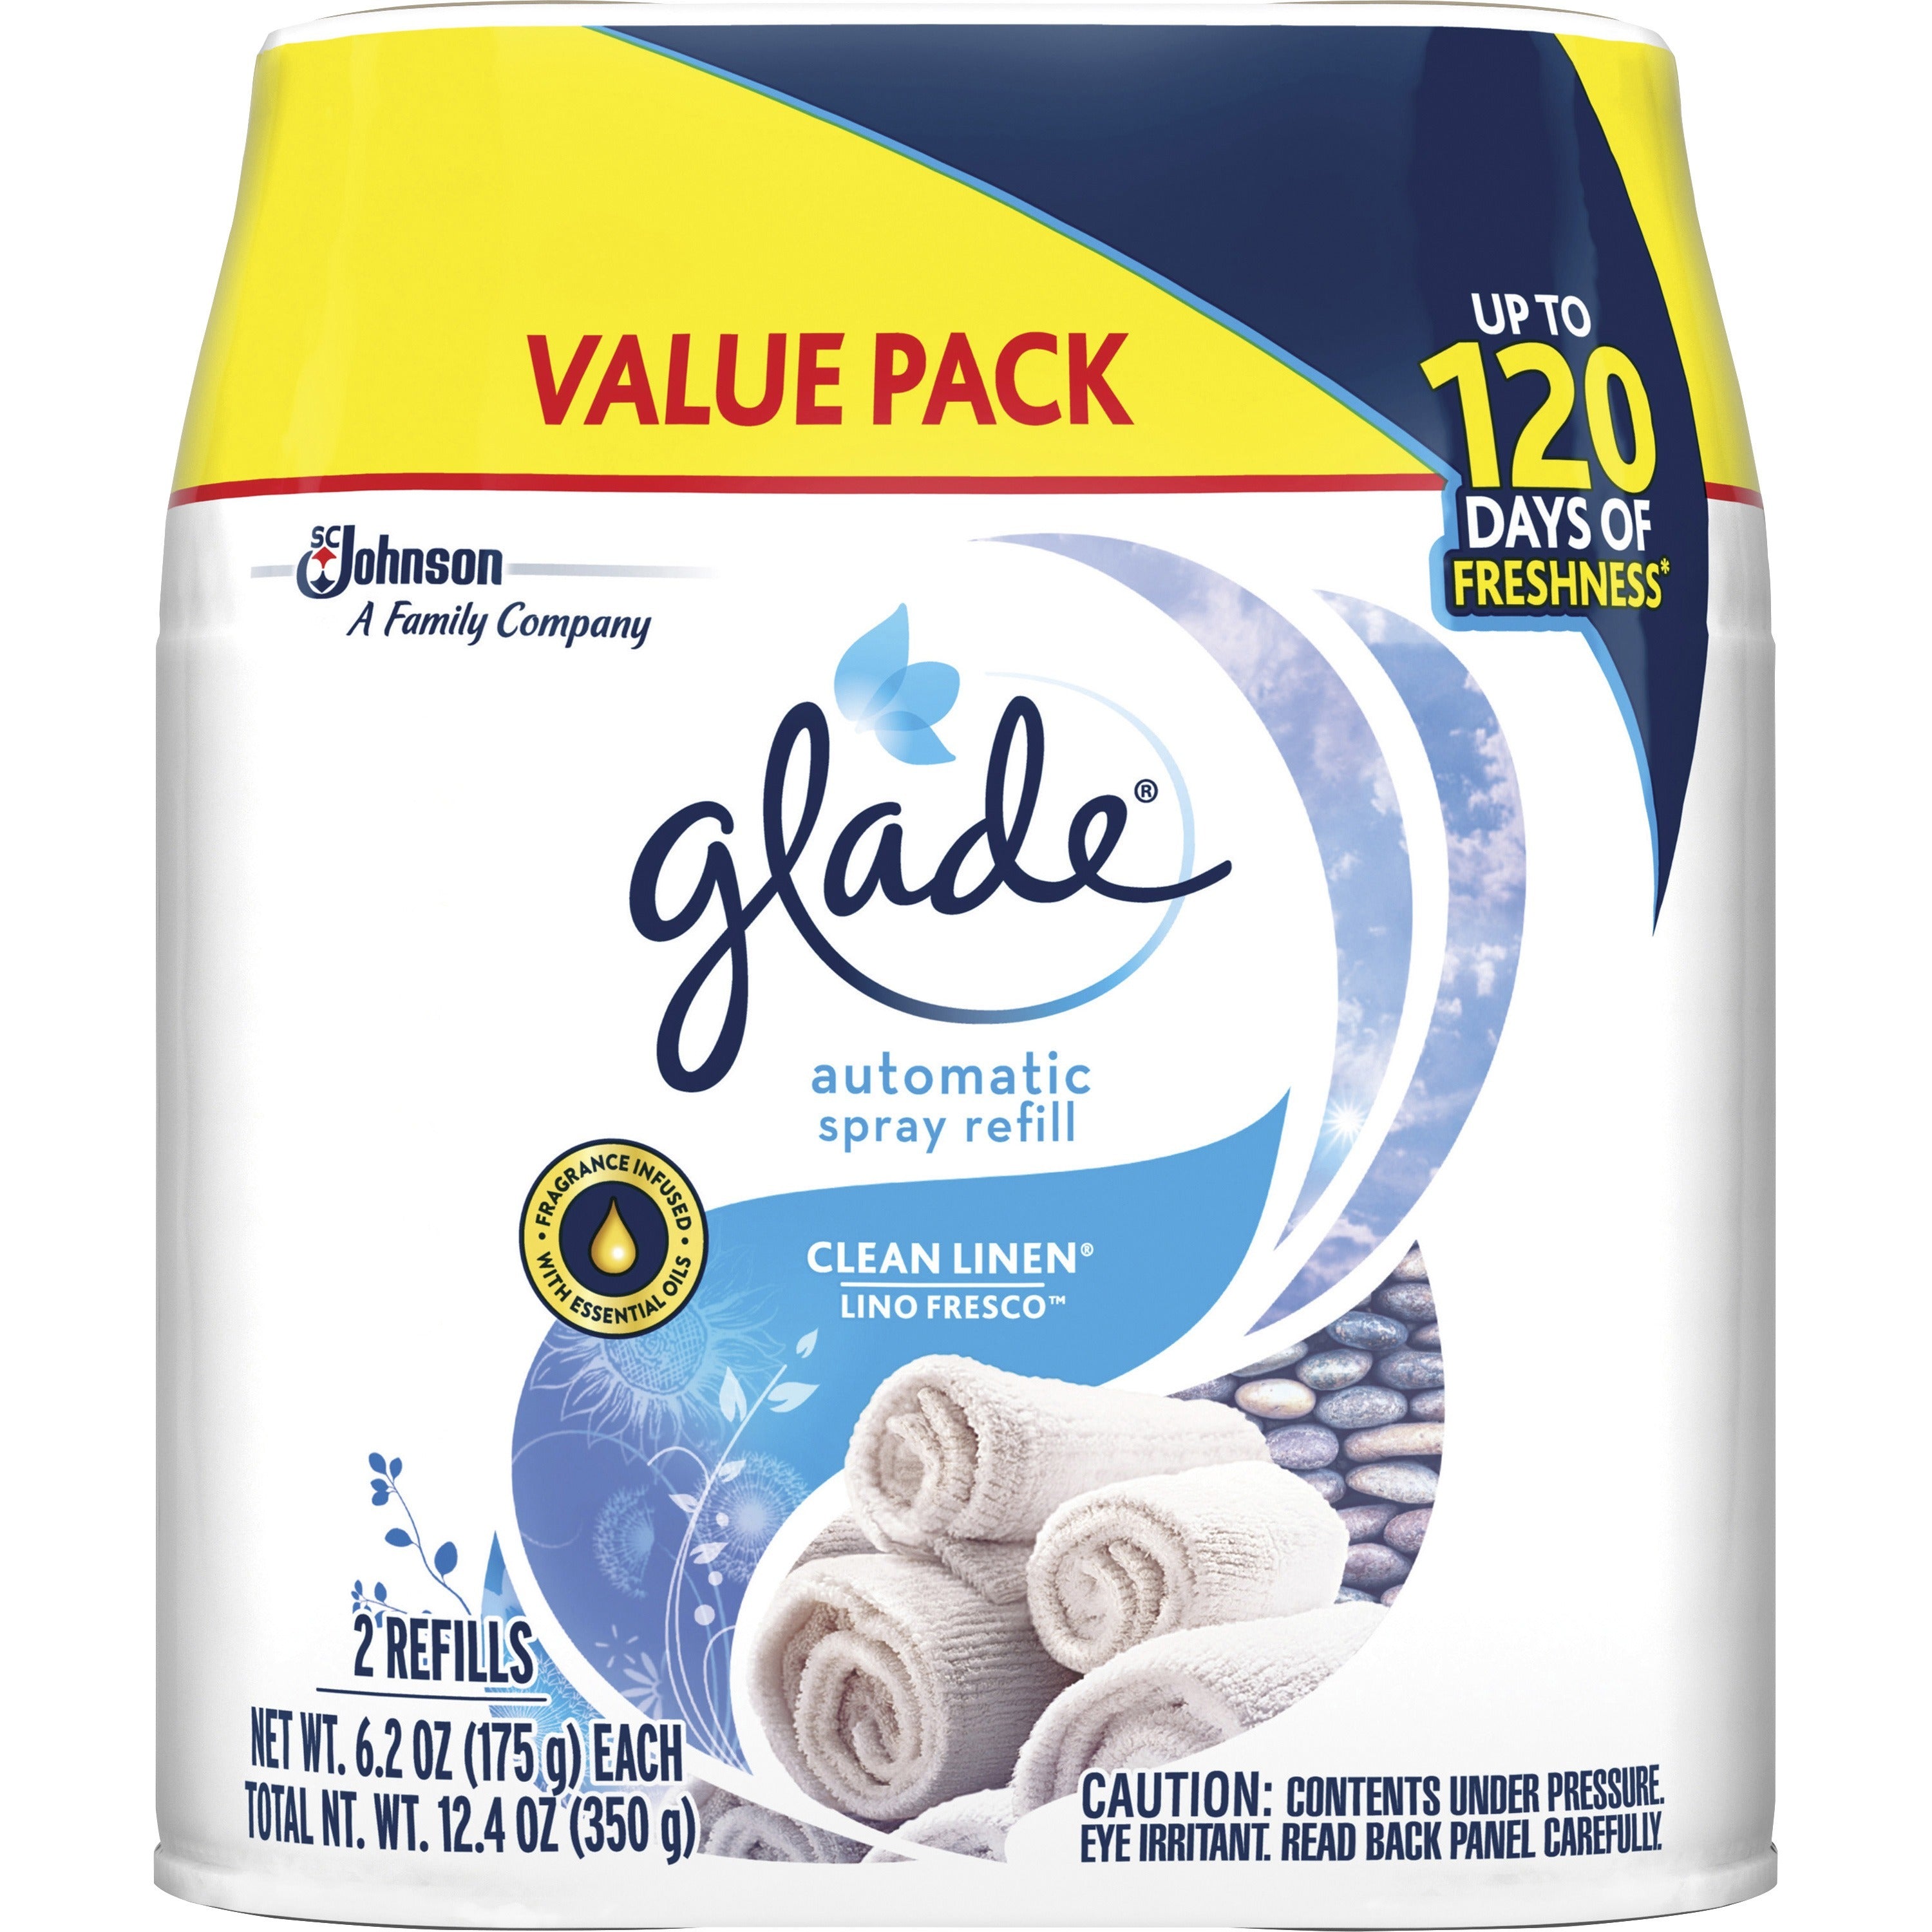 glade-automatic-spray-refill-value-pack-1240-oz-clean-linen-60-day-3-carton-long-lasting-phthalate-free-paraben-free-formaldehyde-free_sjn329388ct - 1